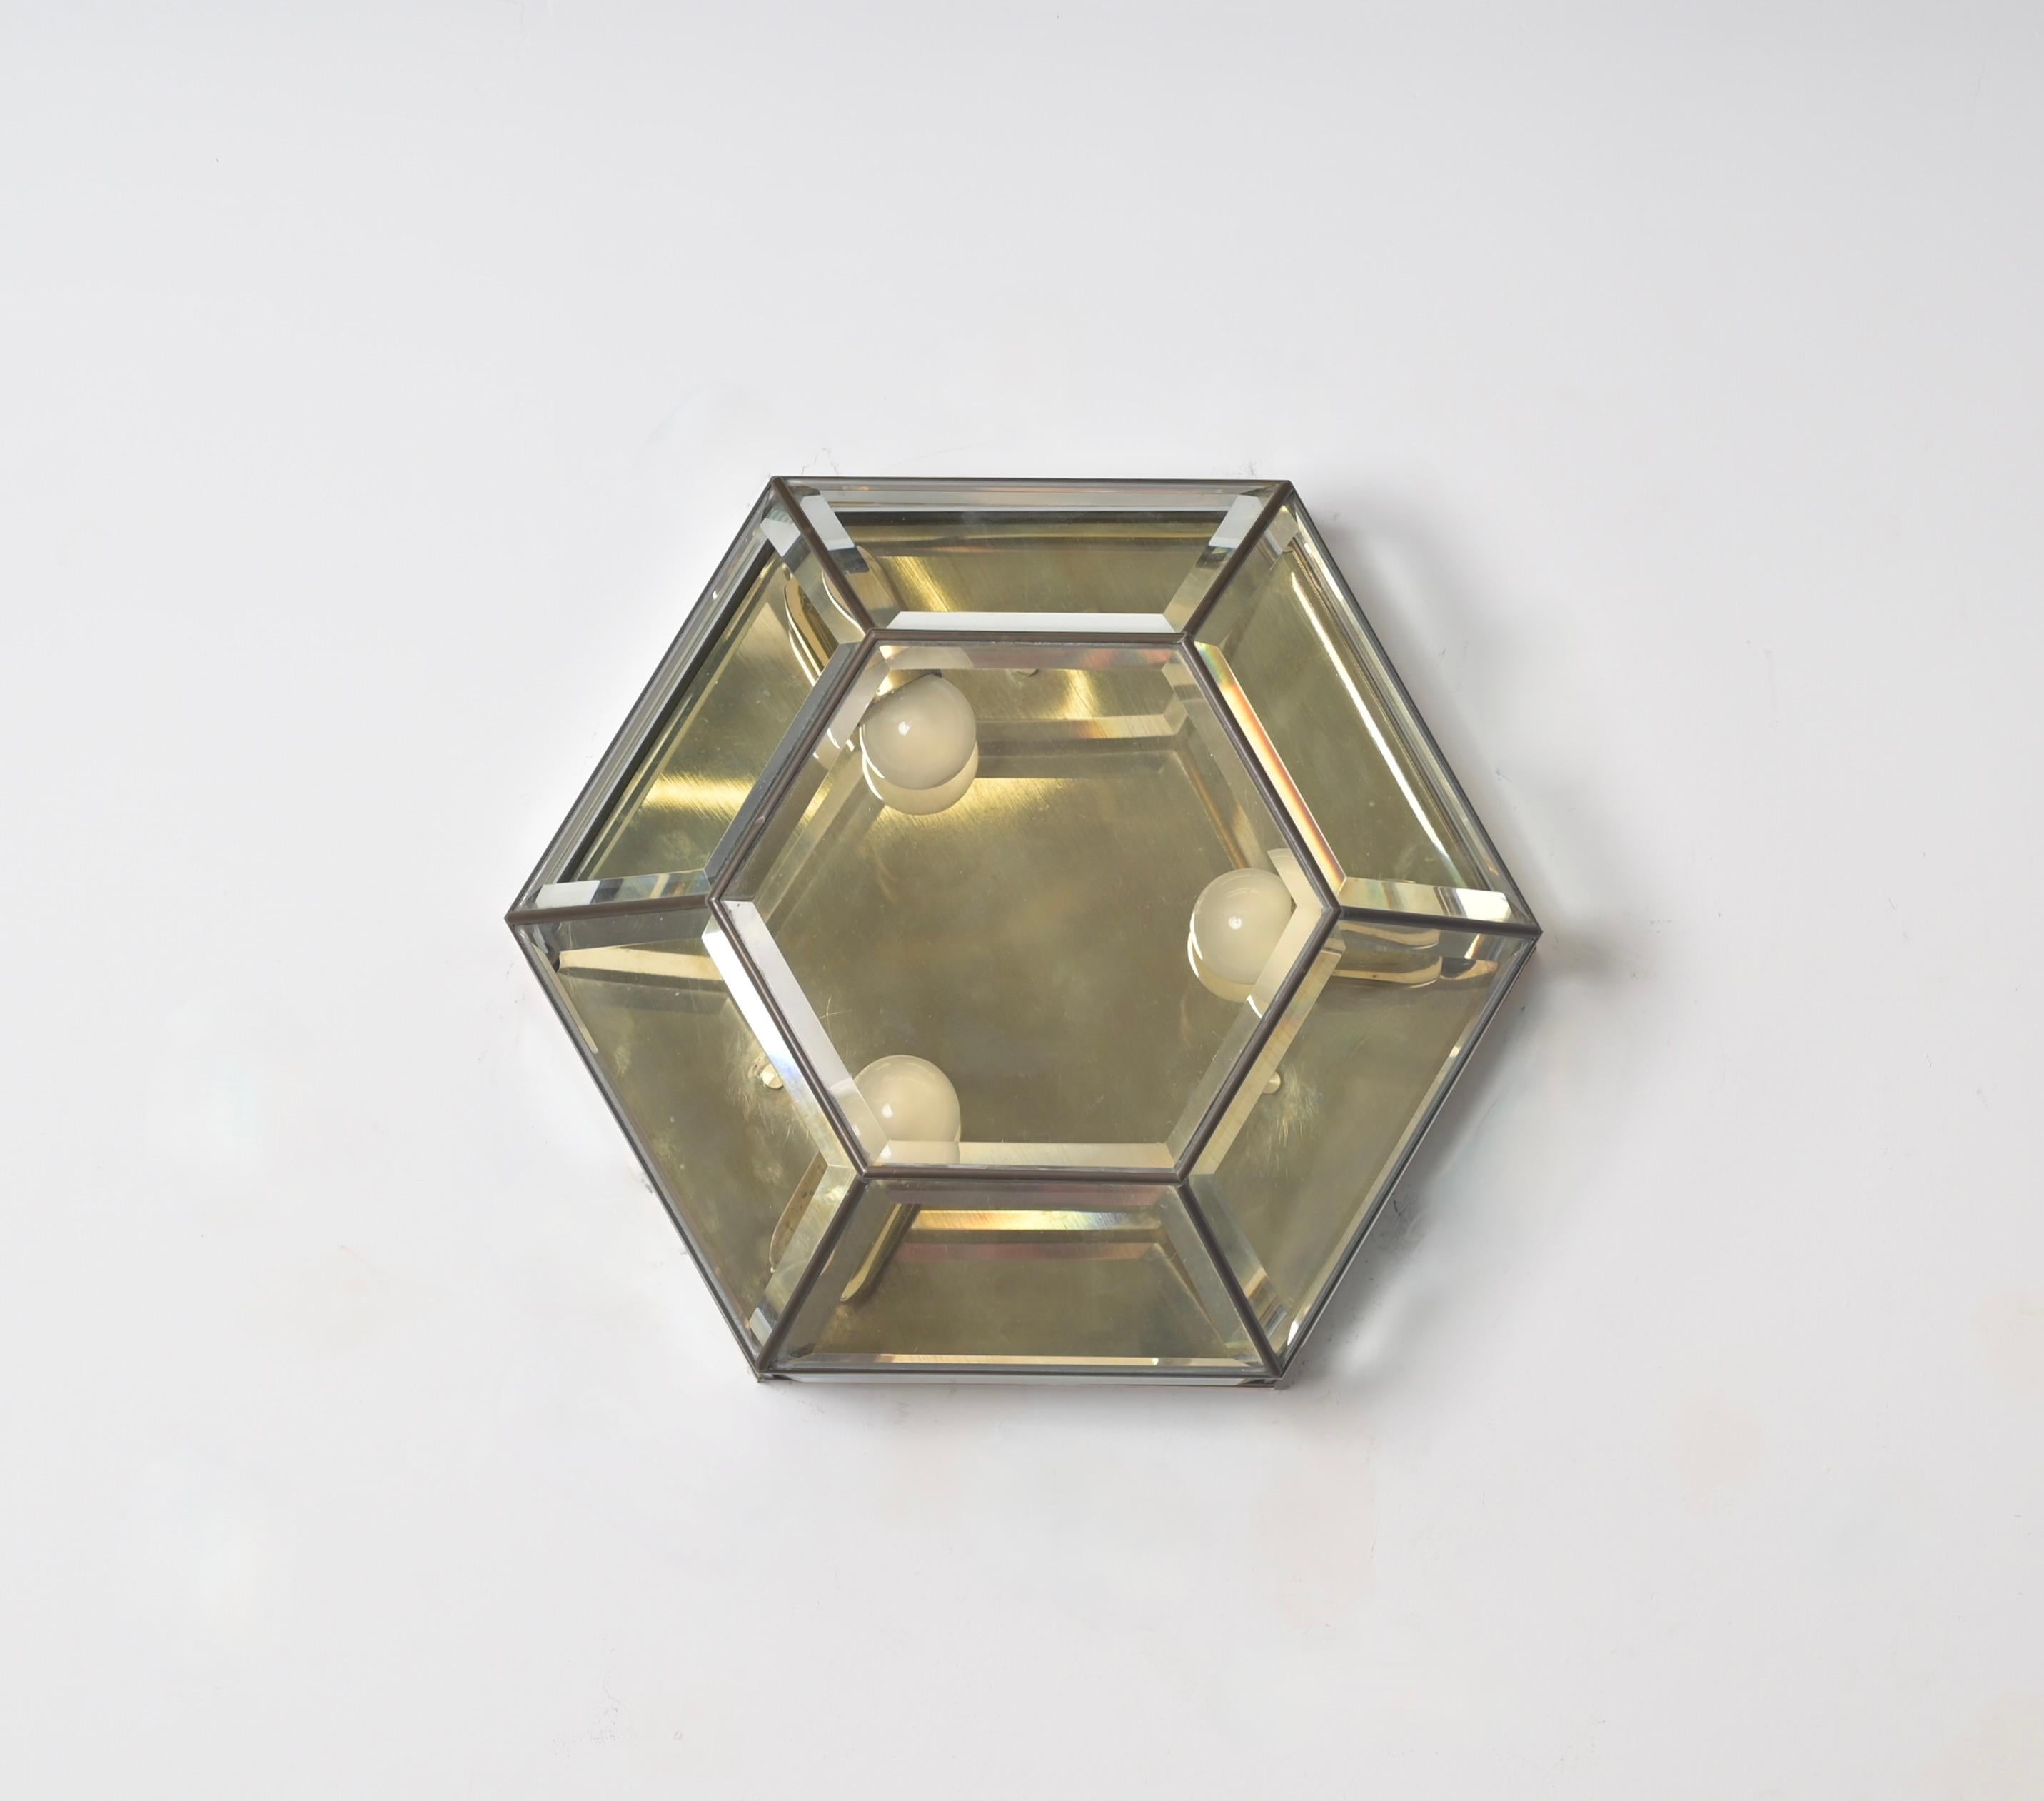 Mid-Century Modern Brass and Beveled Glass Hexagonal Sconce or Ceiling Lamp Fontana Arte Italy 1950 For Sale